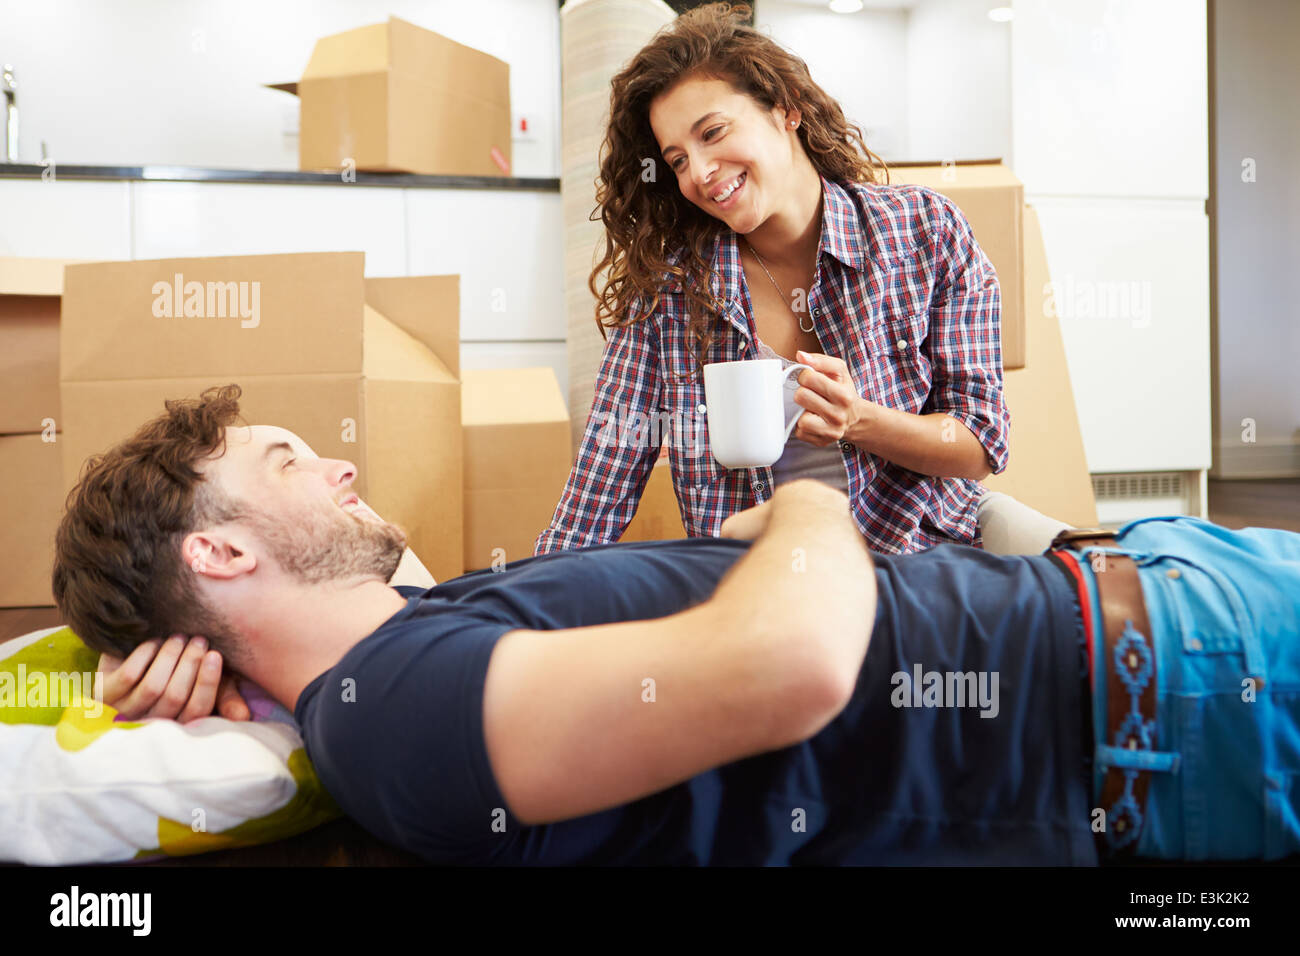 Couple Taking A Break During House Move Stock Photo